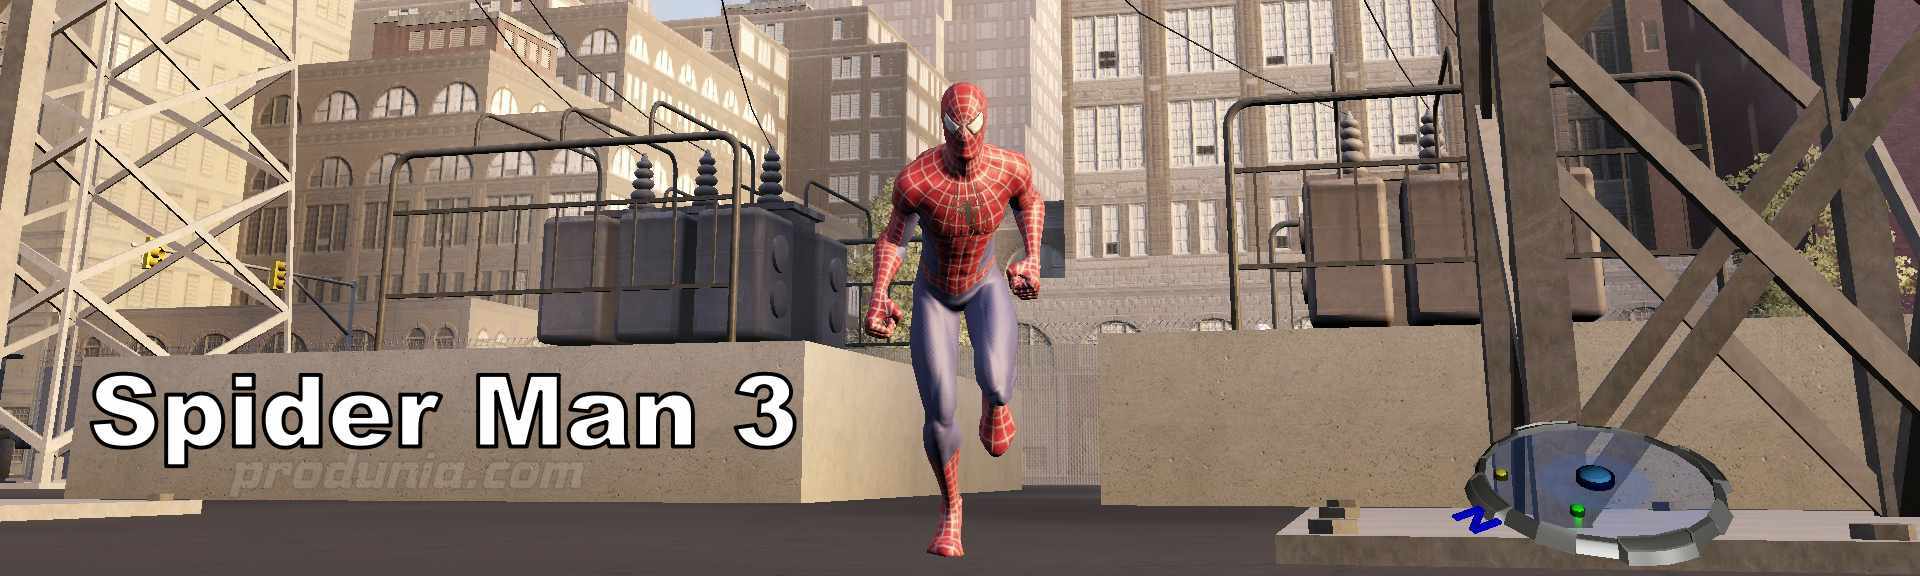 Spiderman 3 game download for pc [ highly compressed ] just in 2.76 GB